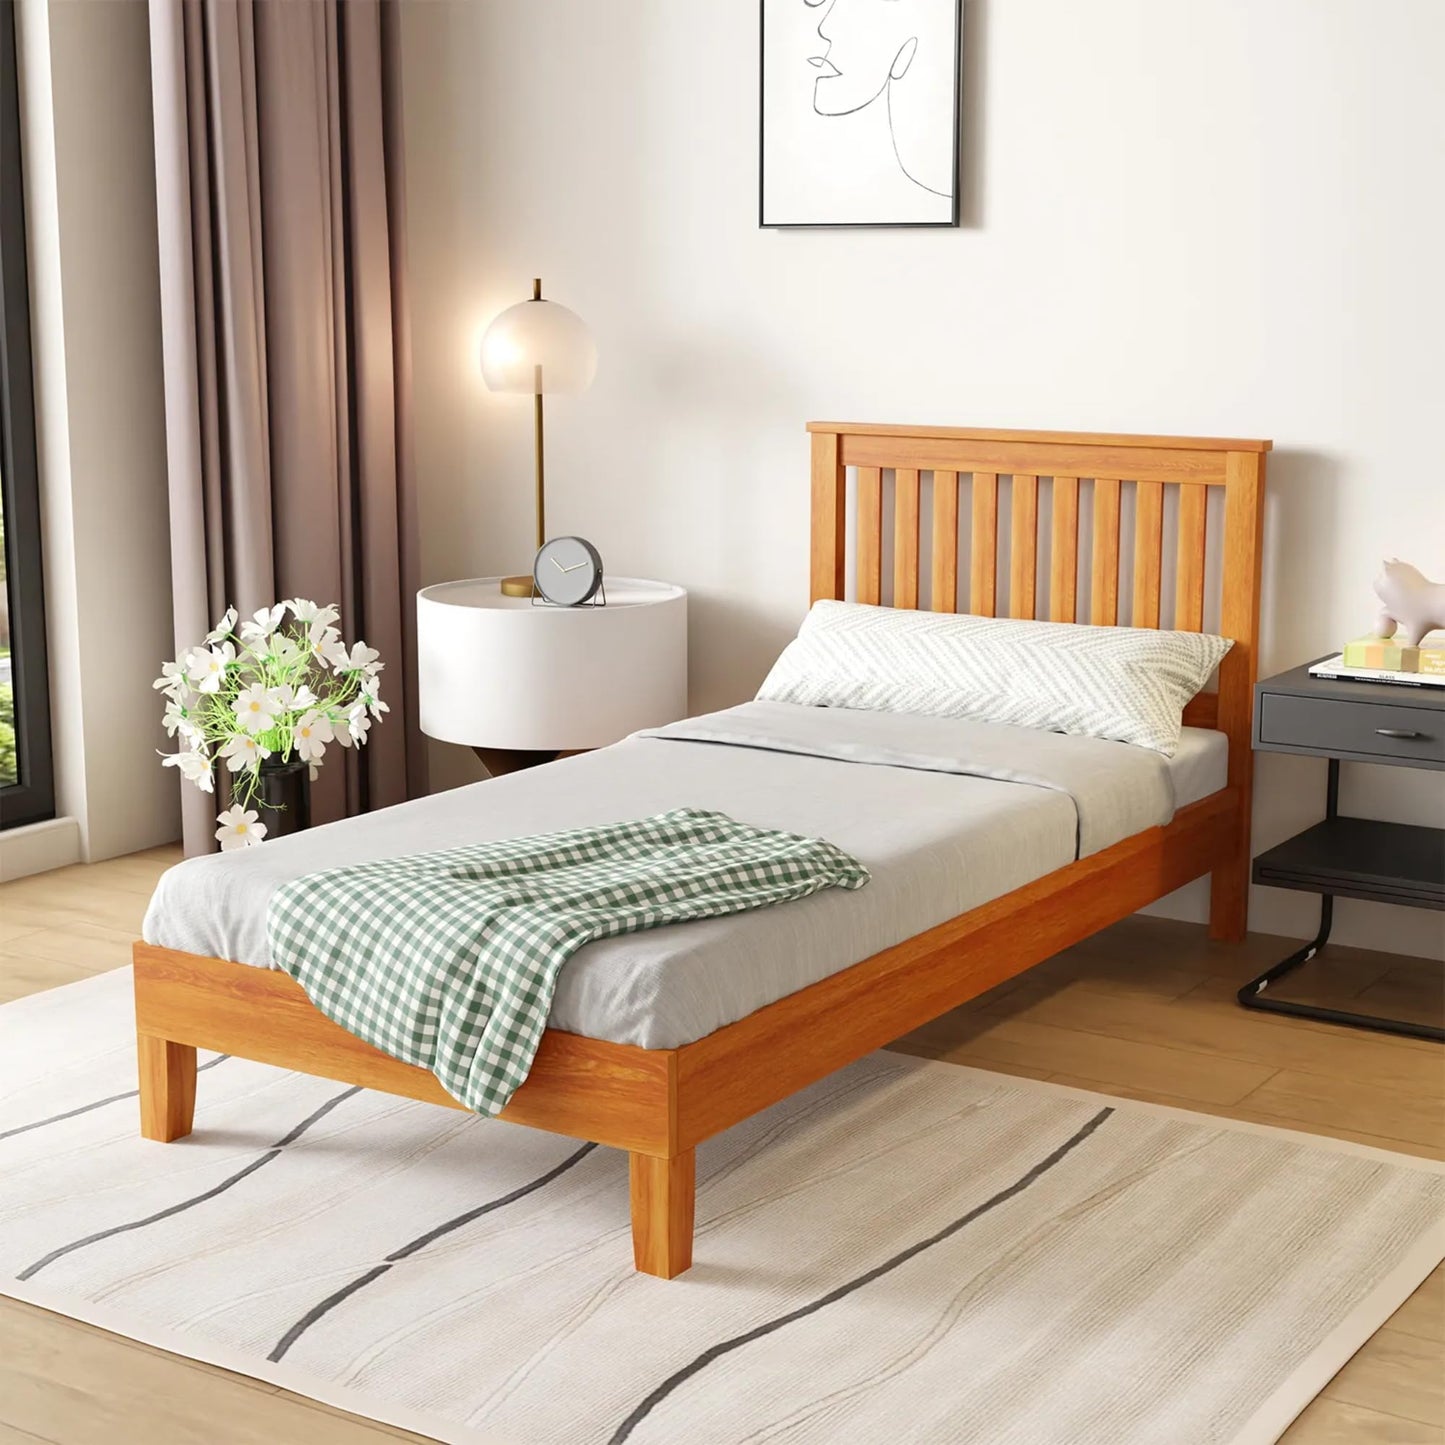 Solid Wood Bed Frame with Headboard, Bed Frame Wooden Platform Mattress Foundation Bed Frames with Storage, Wooden Slats Support, No Box Spring Needed, Under Bed Storage, Easy Assembly, Natural